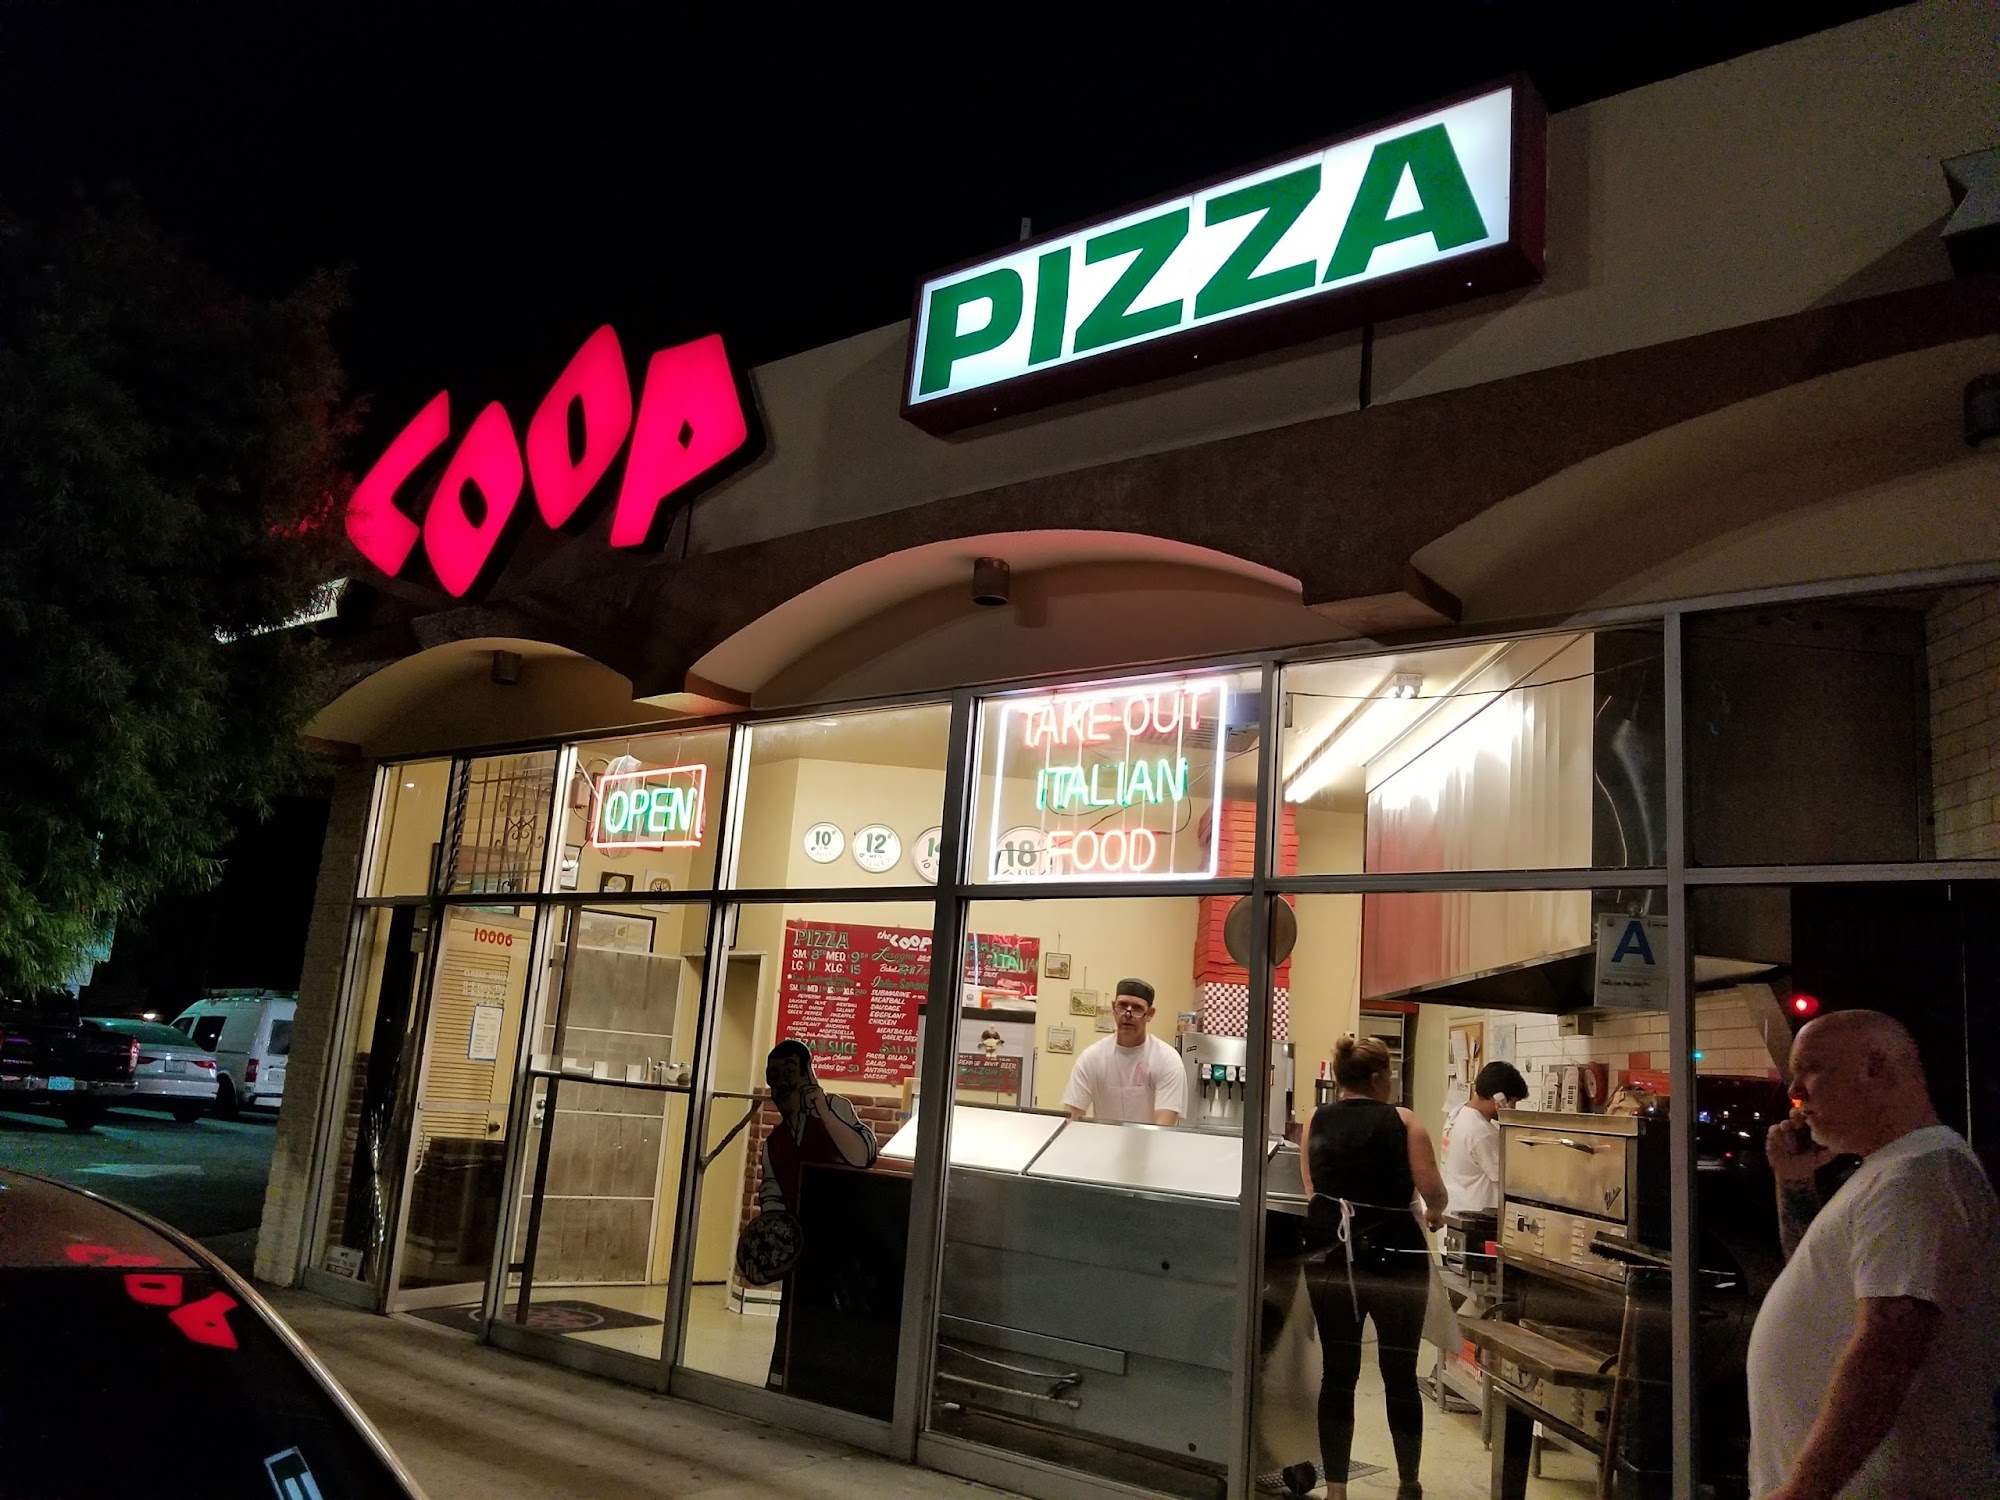 The Coop Pizza